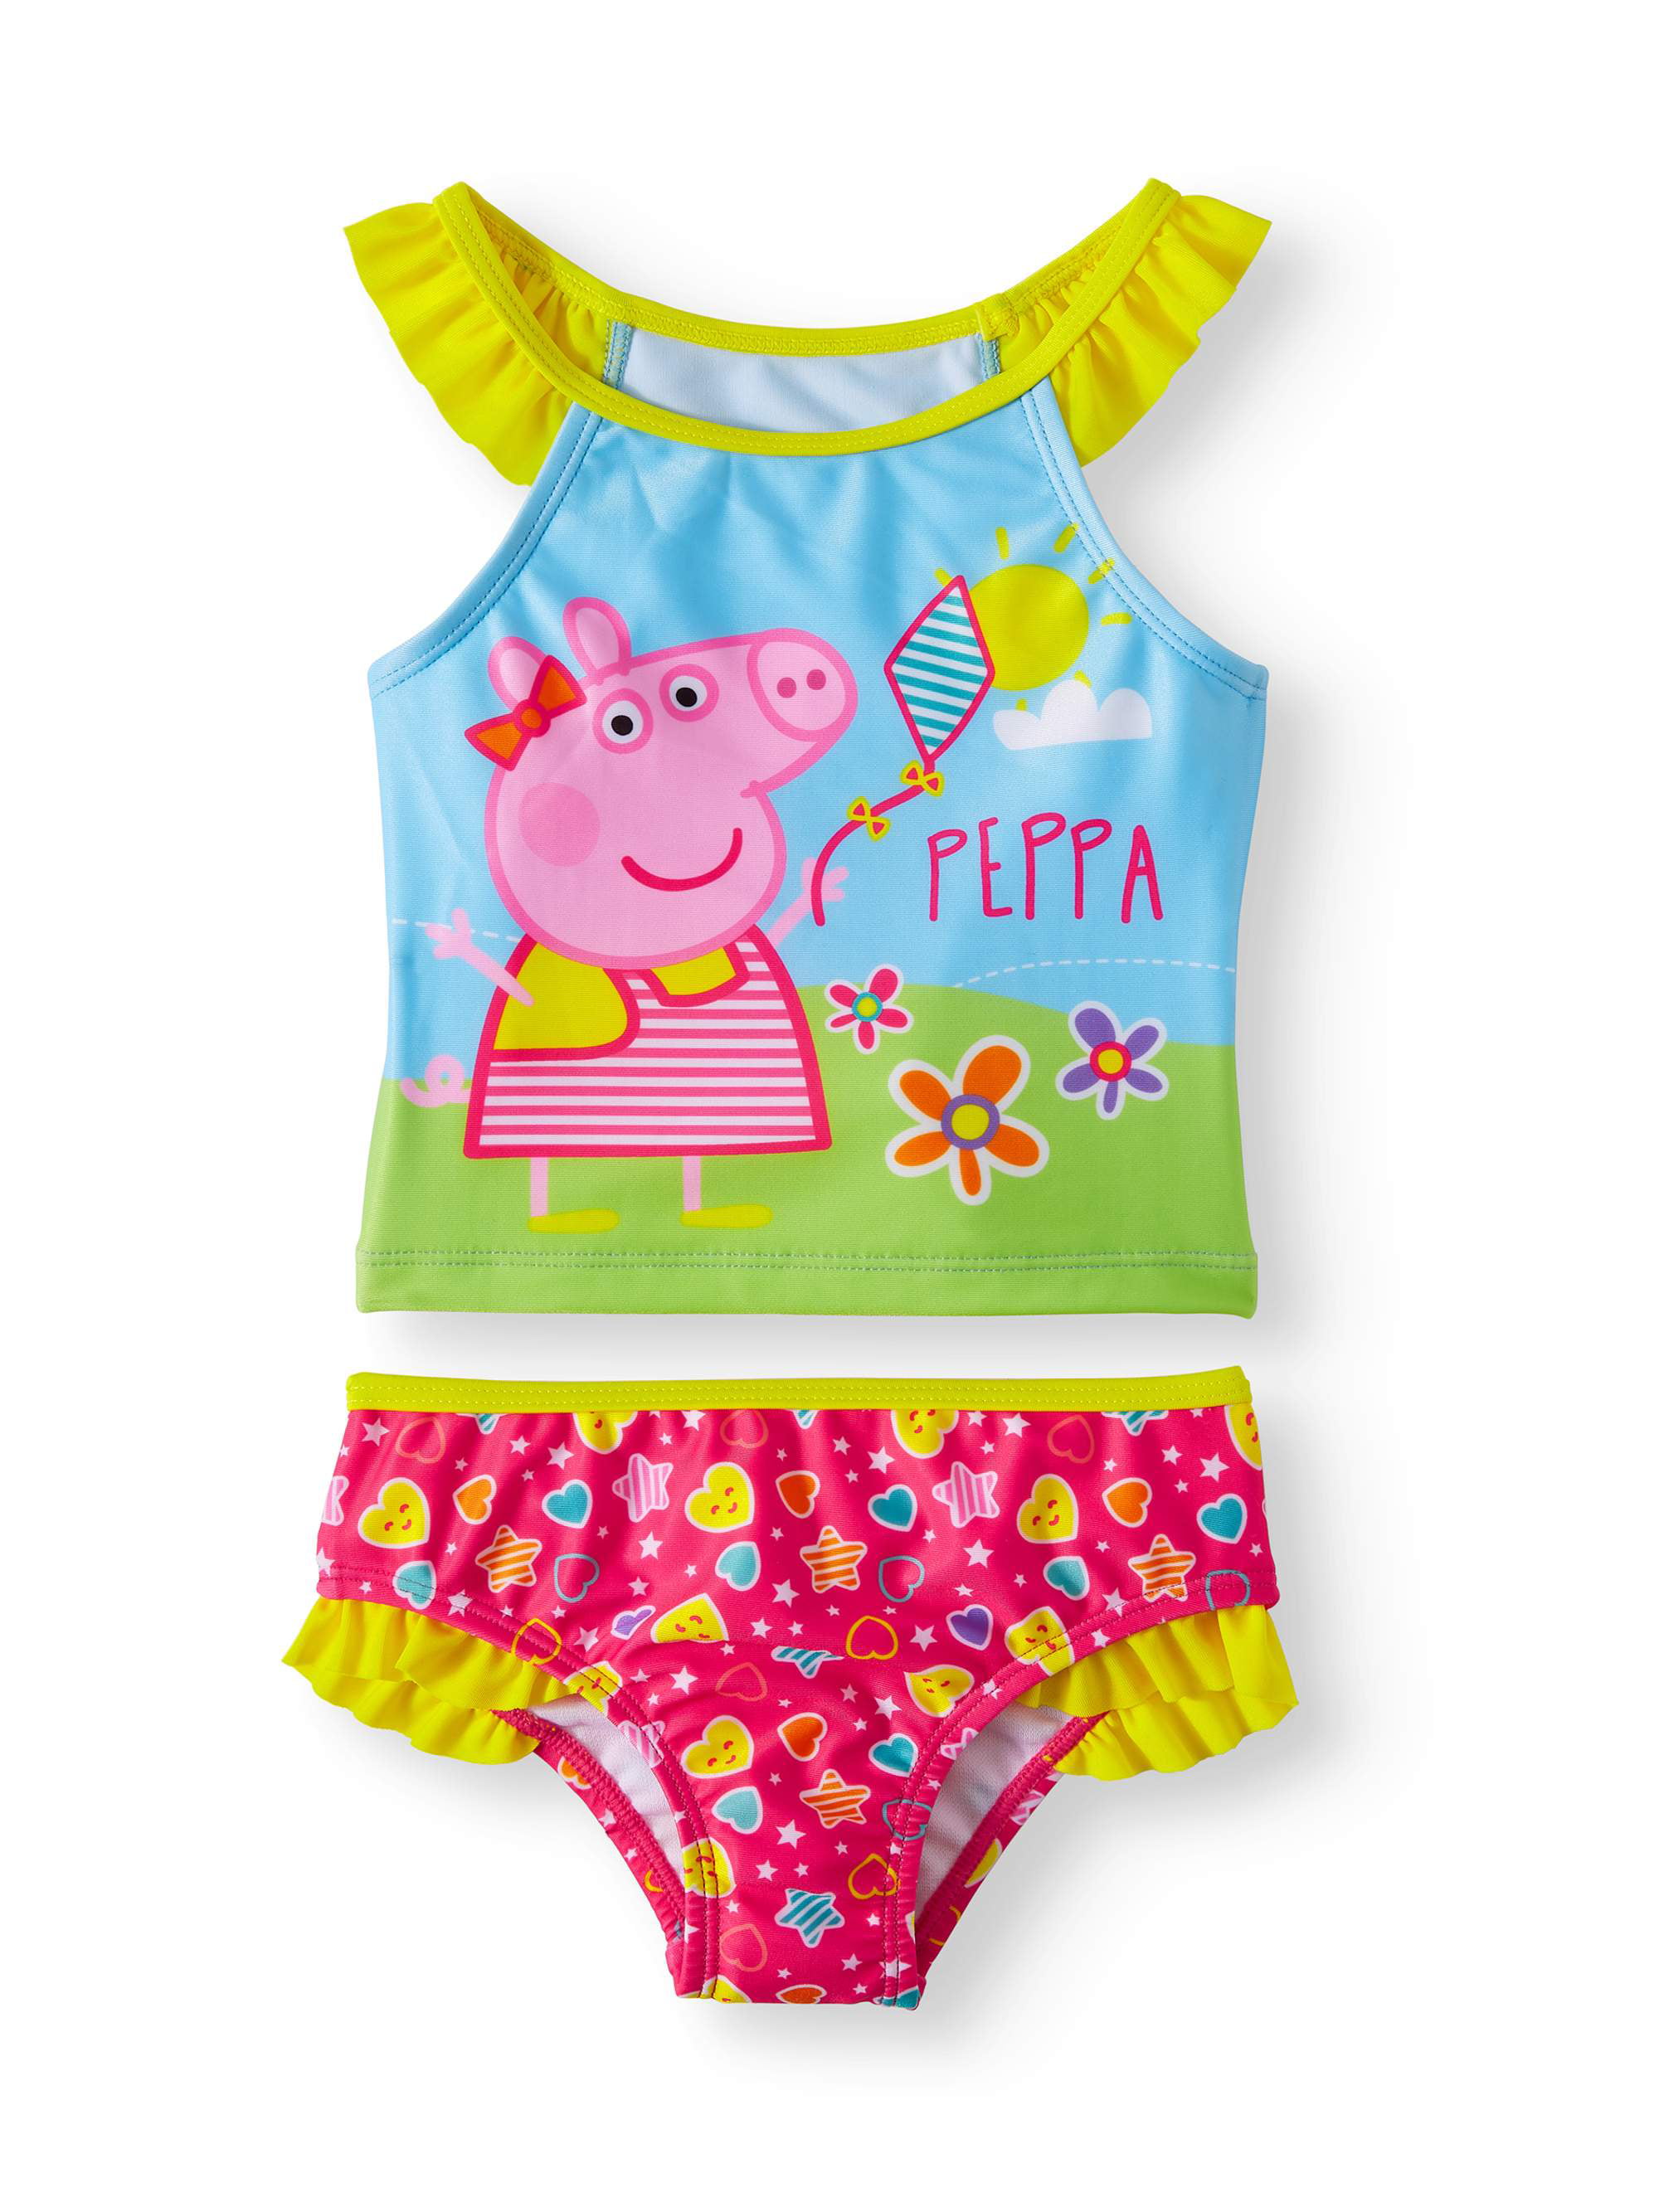 NWT Peppa Pig Toddler Girls One Piece Swimsuit Size 2T 